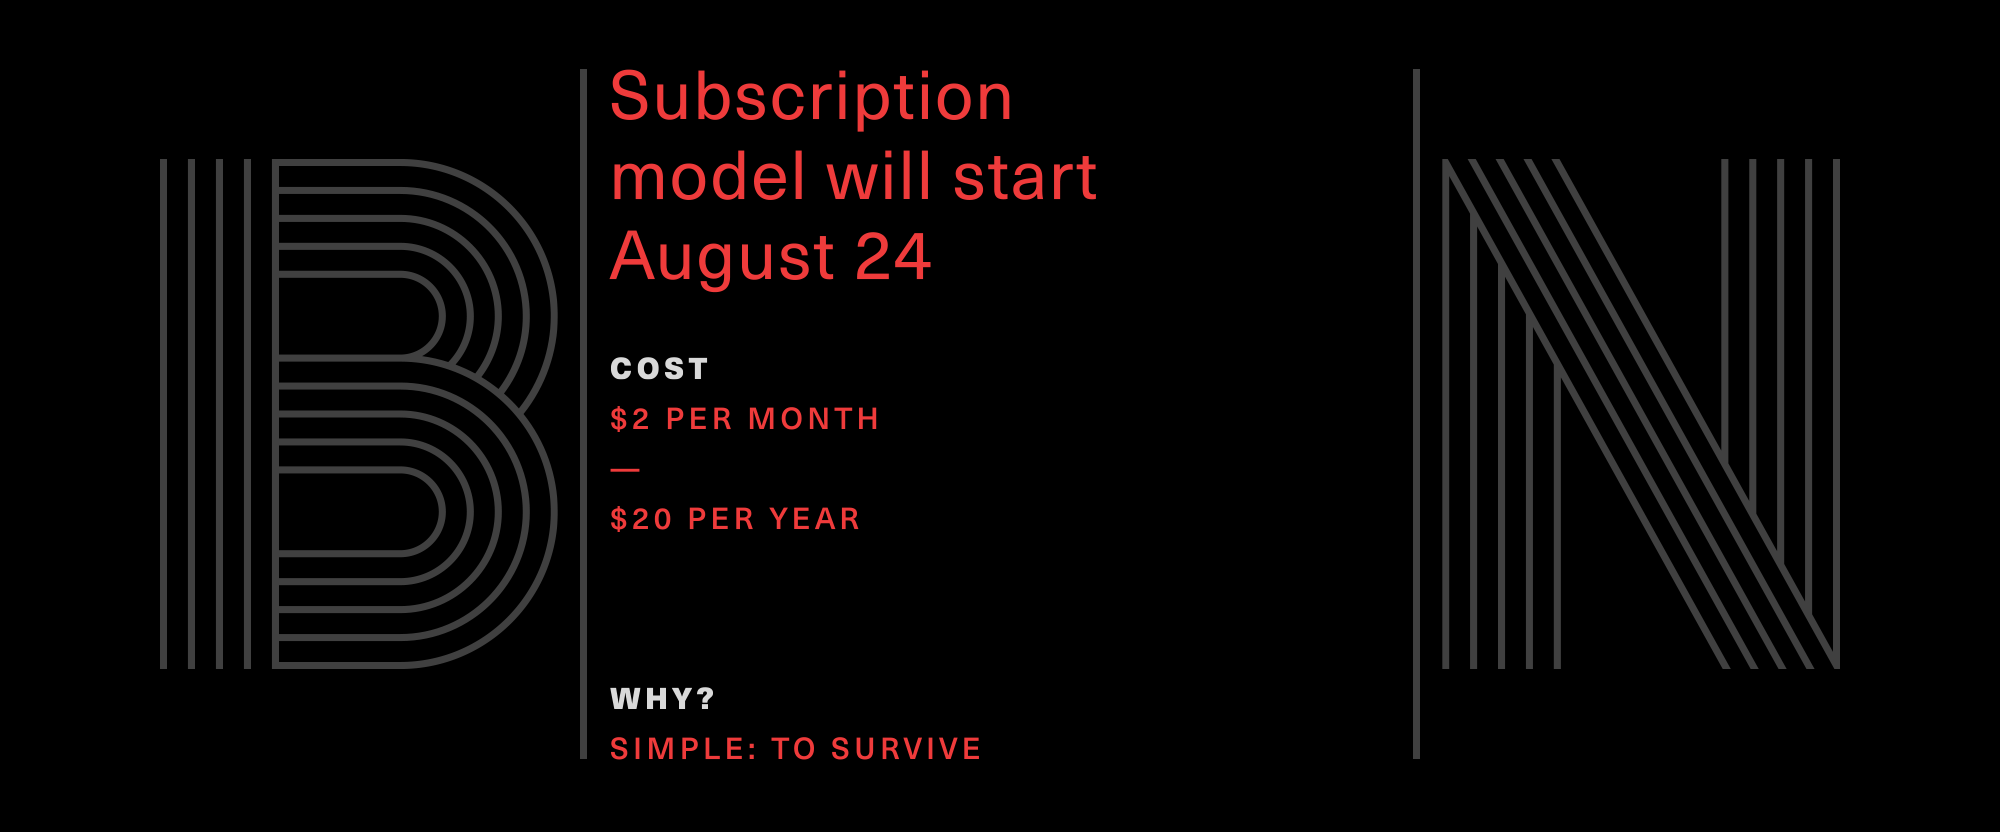 Brand New will Shift to Subscription Model